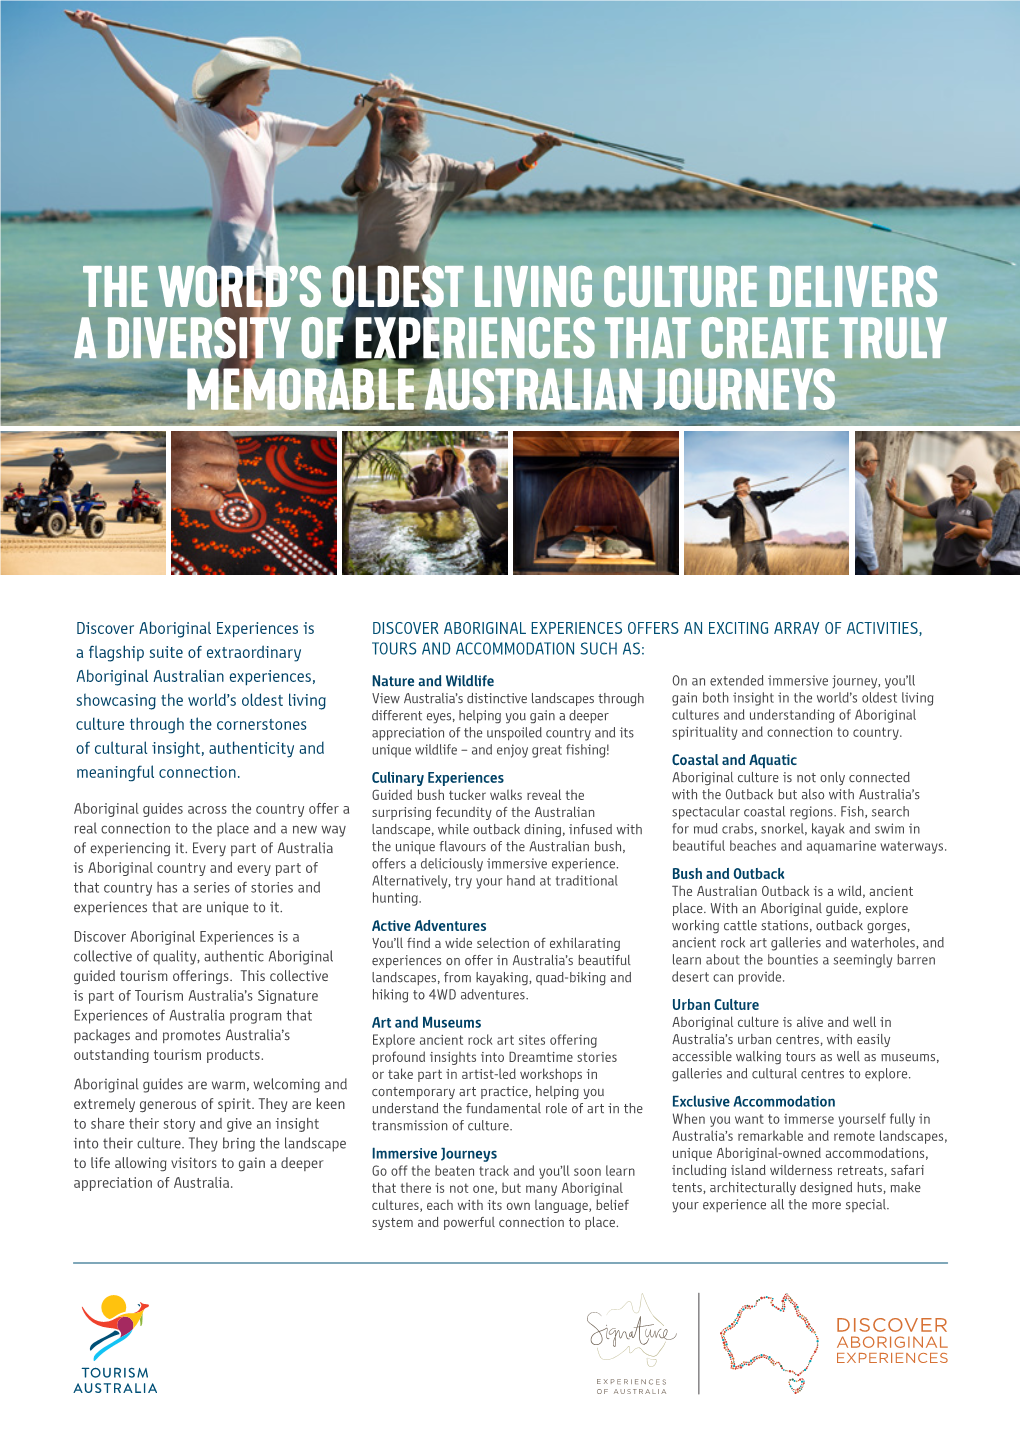 The World's Oldest Living Culture Delivers a Diversity of Experiences